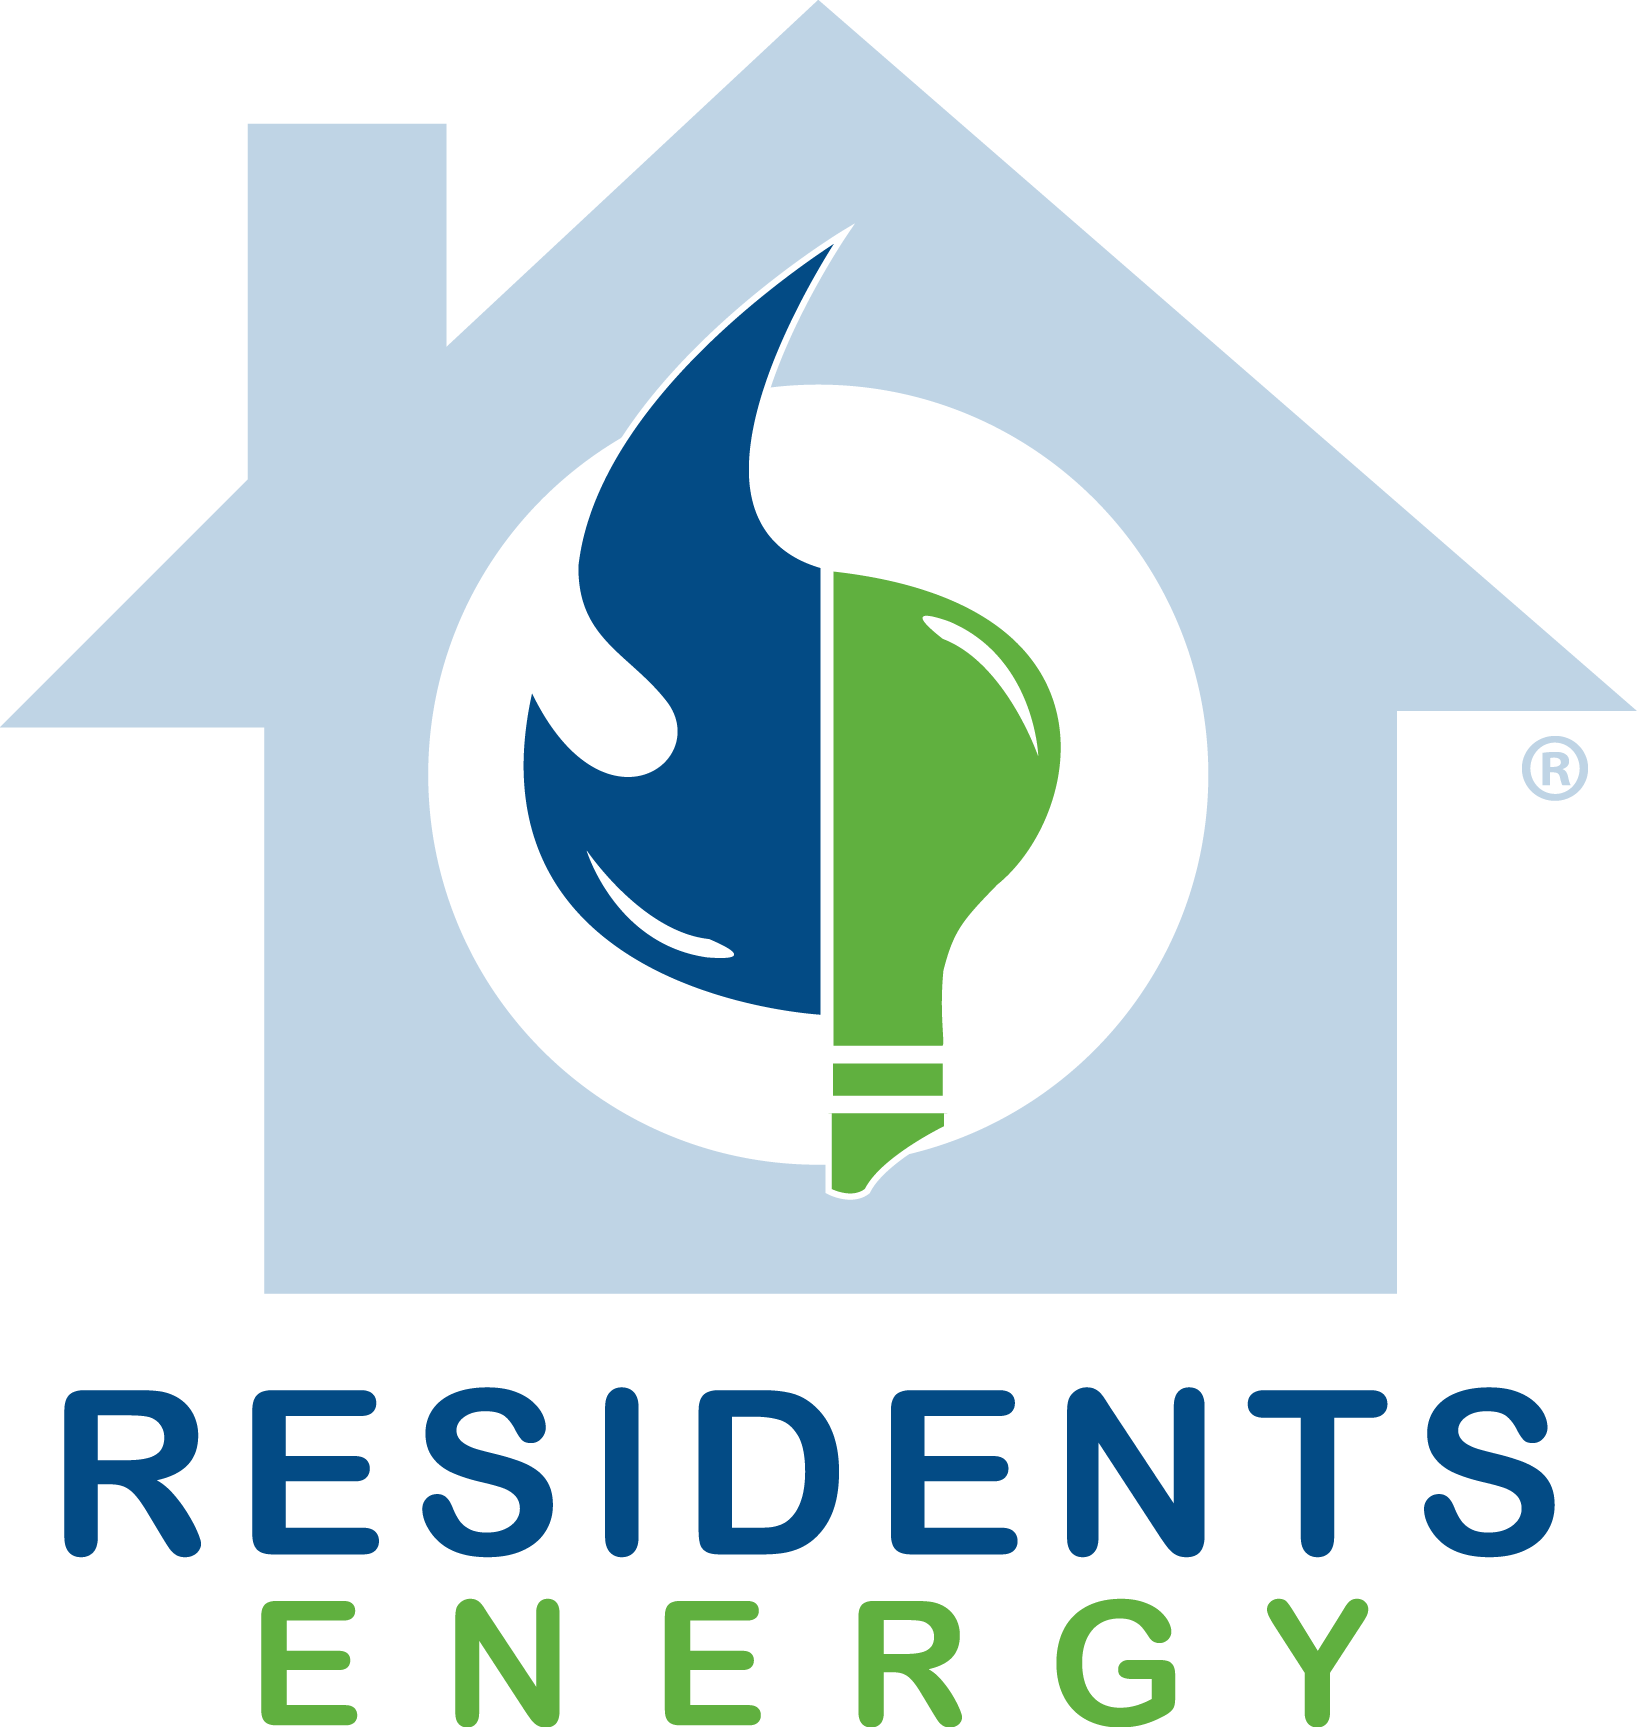 Click to see details for Residents Energy, LLC offer. Price 5.99